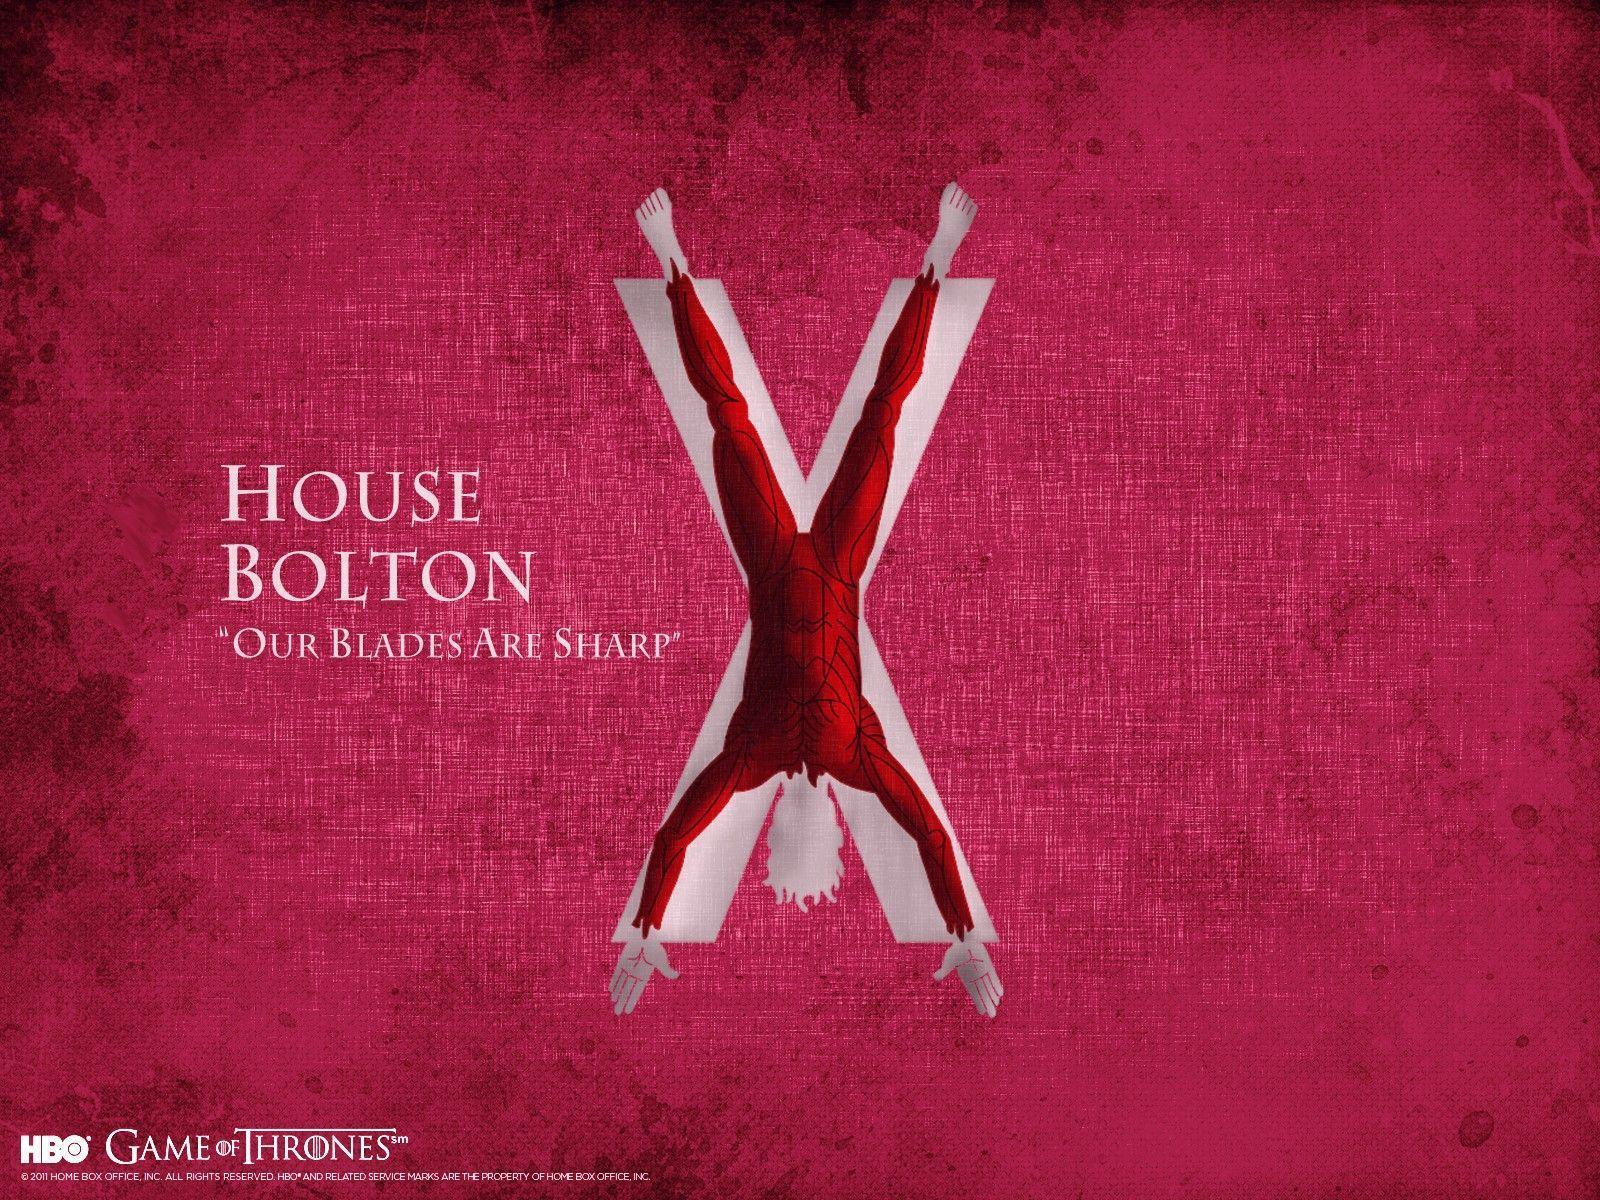 House Bolton. Game of thrones Wallpaper